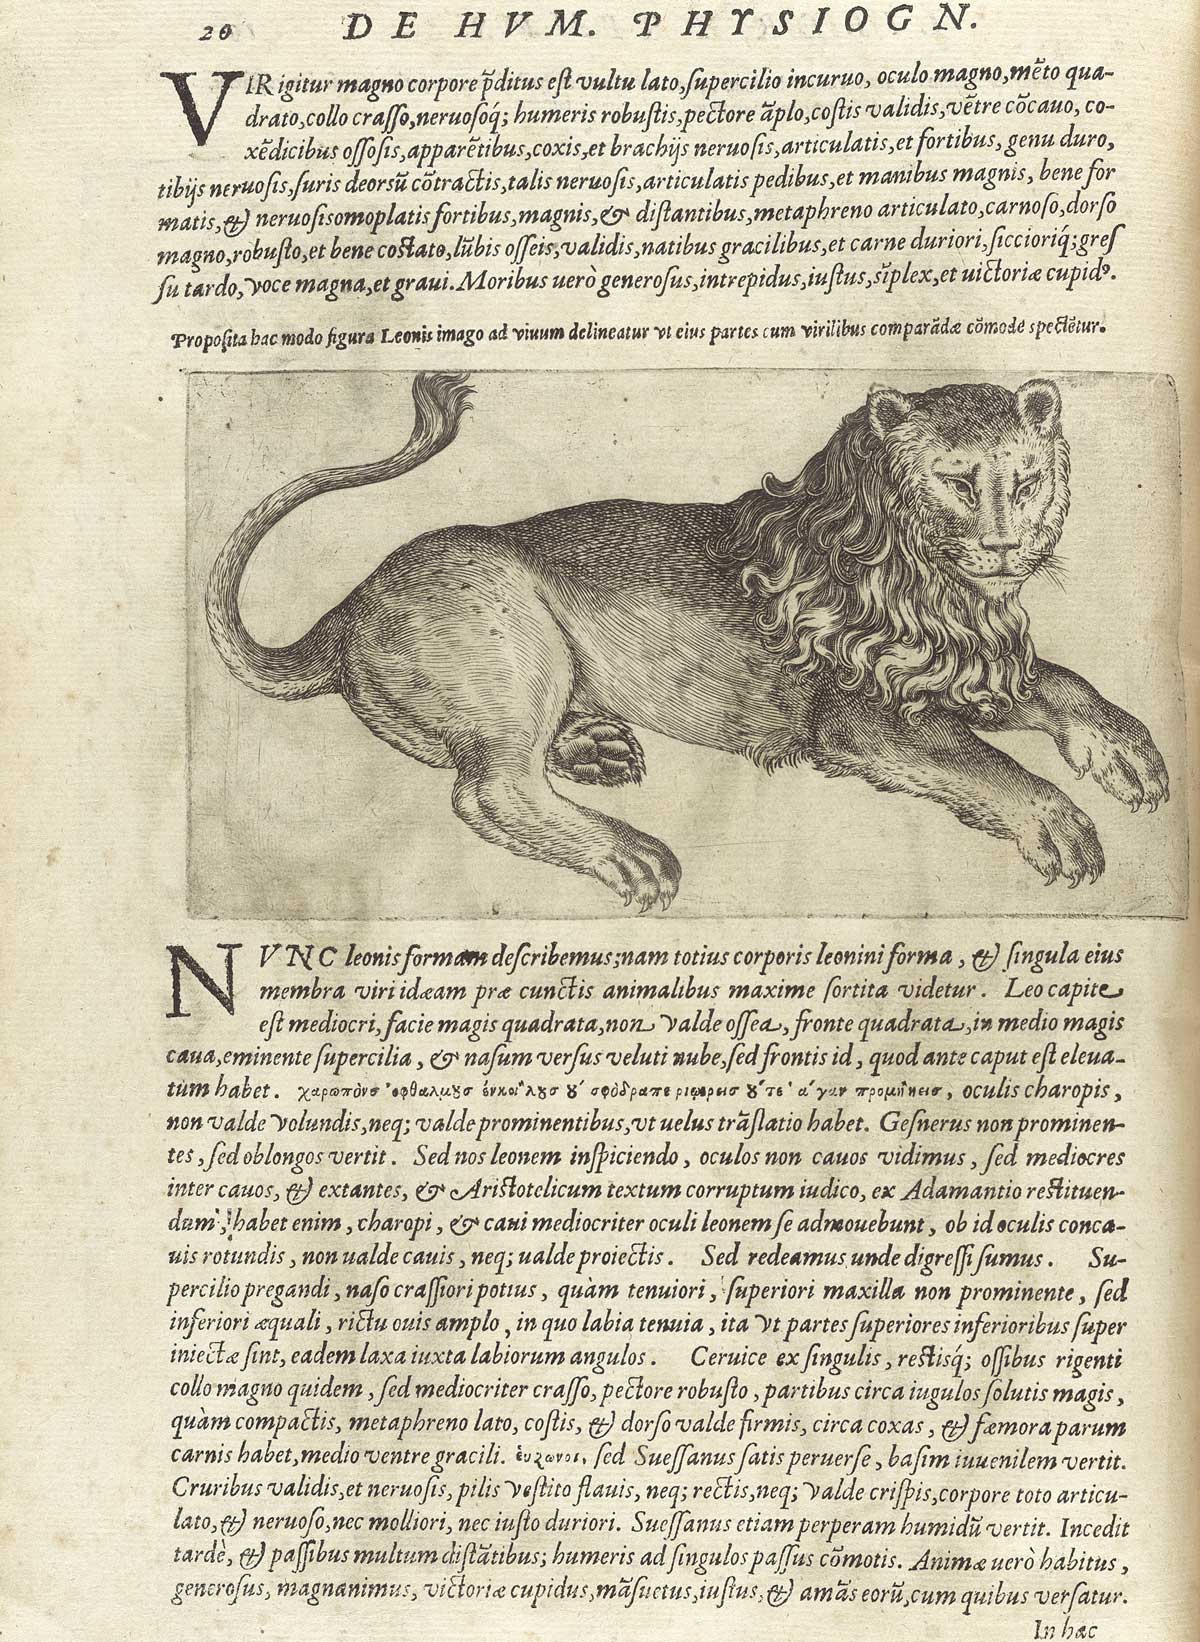 Page 20 of Giambattista della Porta's De humana physiognomonia libri IIII, featuring the right side full length view of a lion that is lying down.